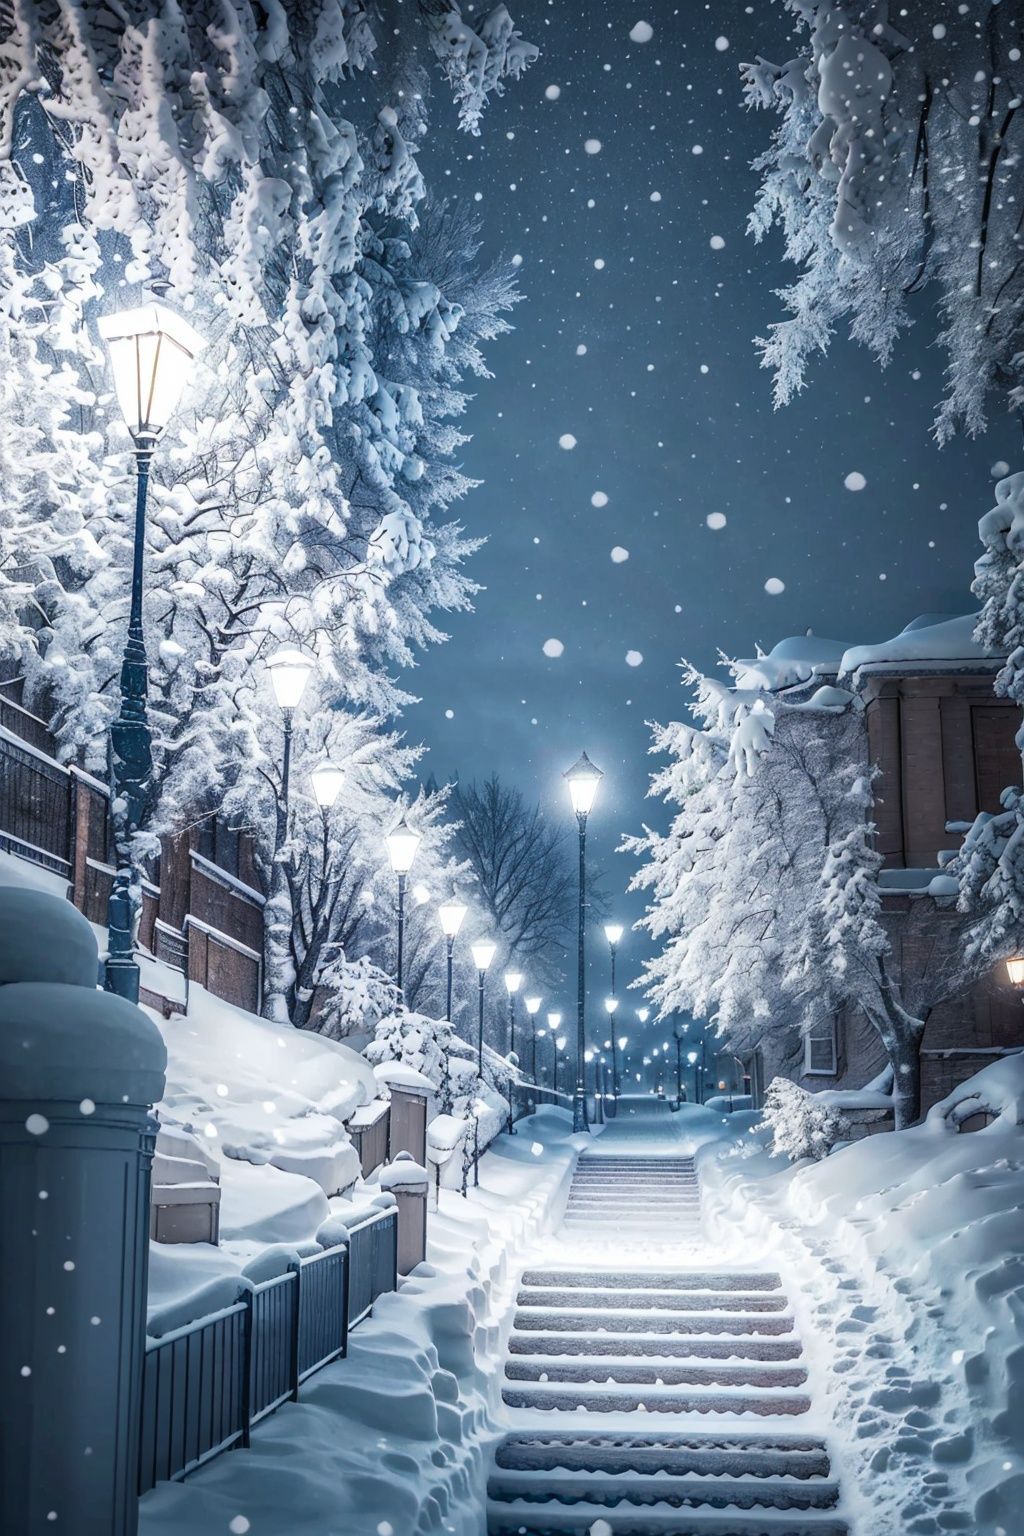  Best quality,8k,cg,no humans, snow, stairs, tree, scenery, outdoors, lamppost, snowing, blue theme, winter, sky, night, bare tree, monochrome